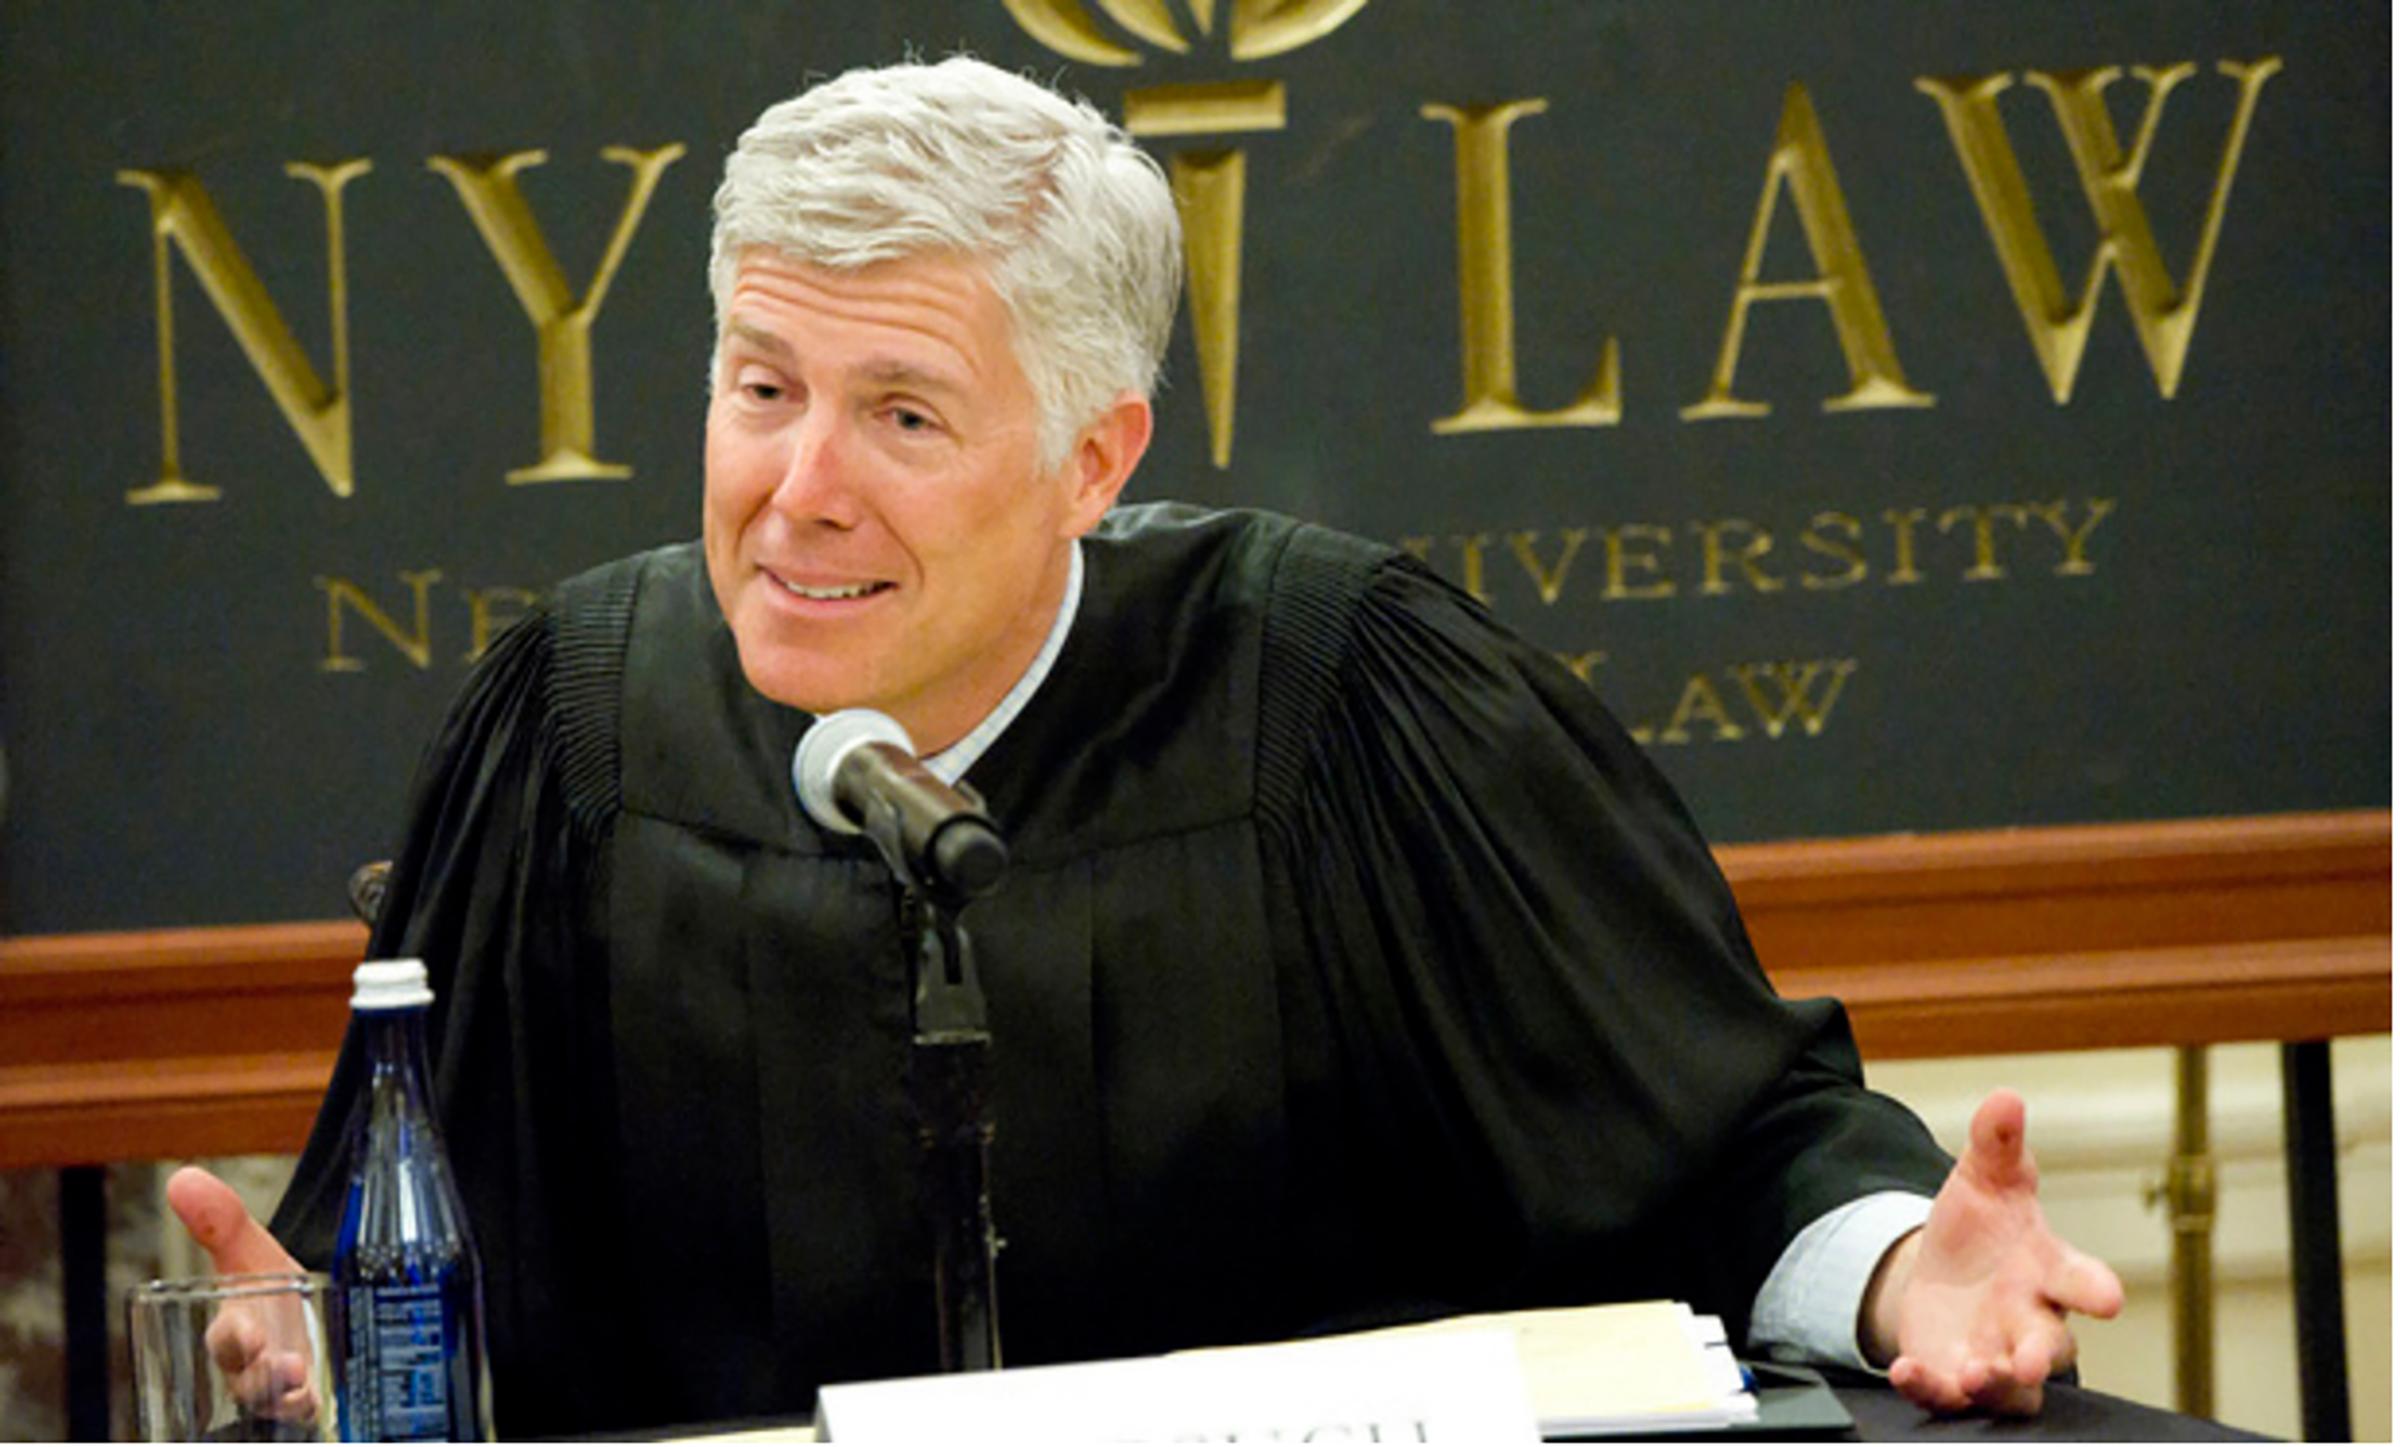 Judge Gorsuch, United States Court of Appeals for The Tenth Circuit, New York, N.Y.